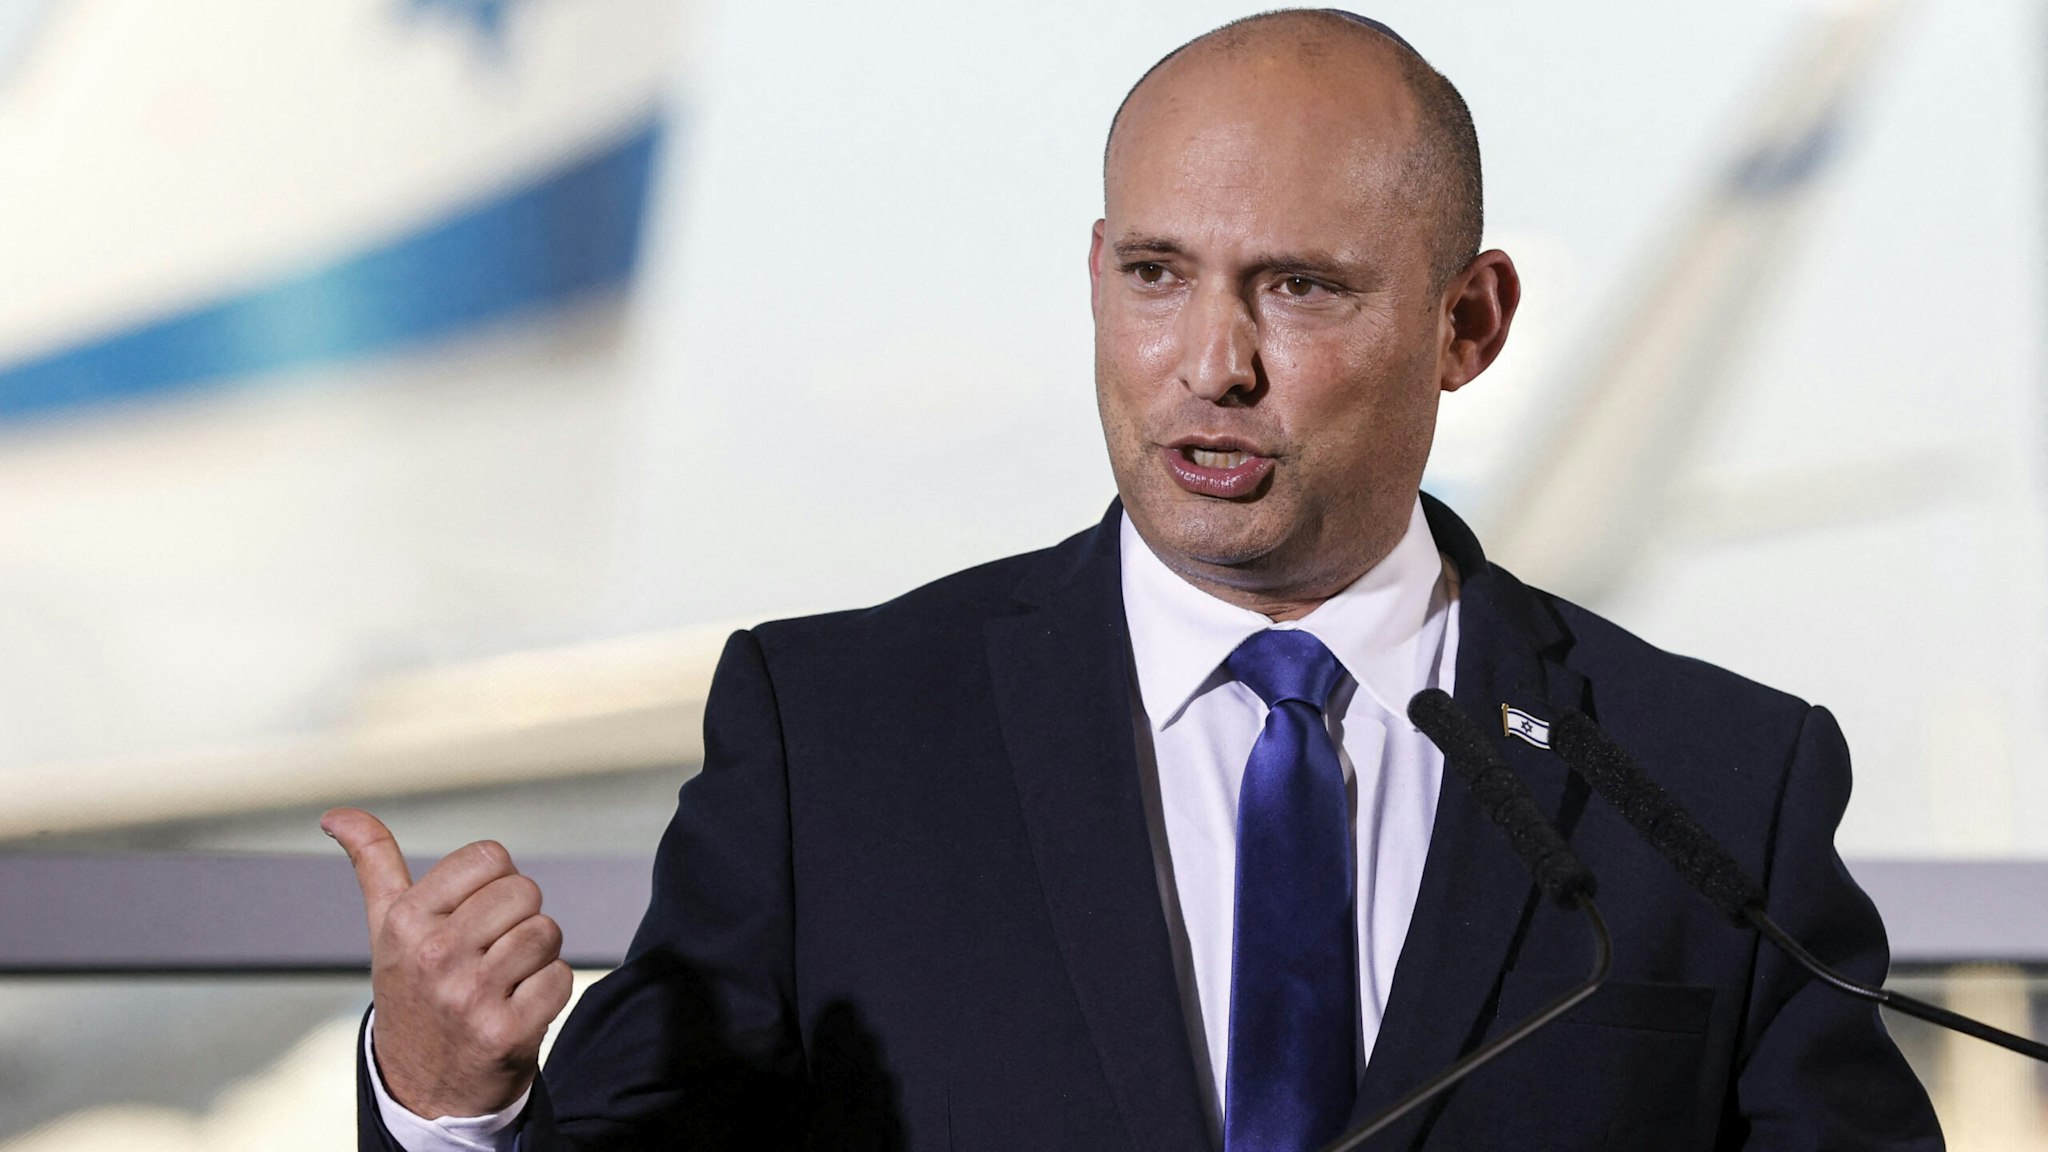 Israeli Prime Minister Naftali Bennett addresses reporters at Ben Gurion International Airport on June 22, 2021. - Israeli Prime Minister Naftali Bennett said that a rise in cases was "a new outbreak" and urged Israelis to cancel their flights abroad and vaccinate their children to head off runaway infections.